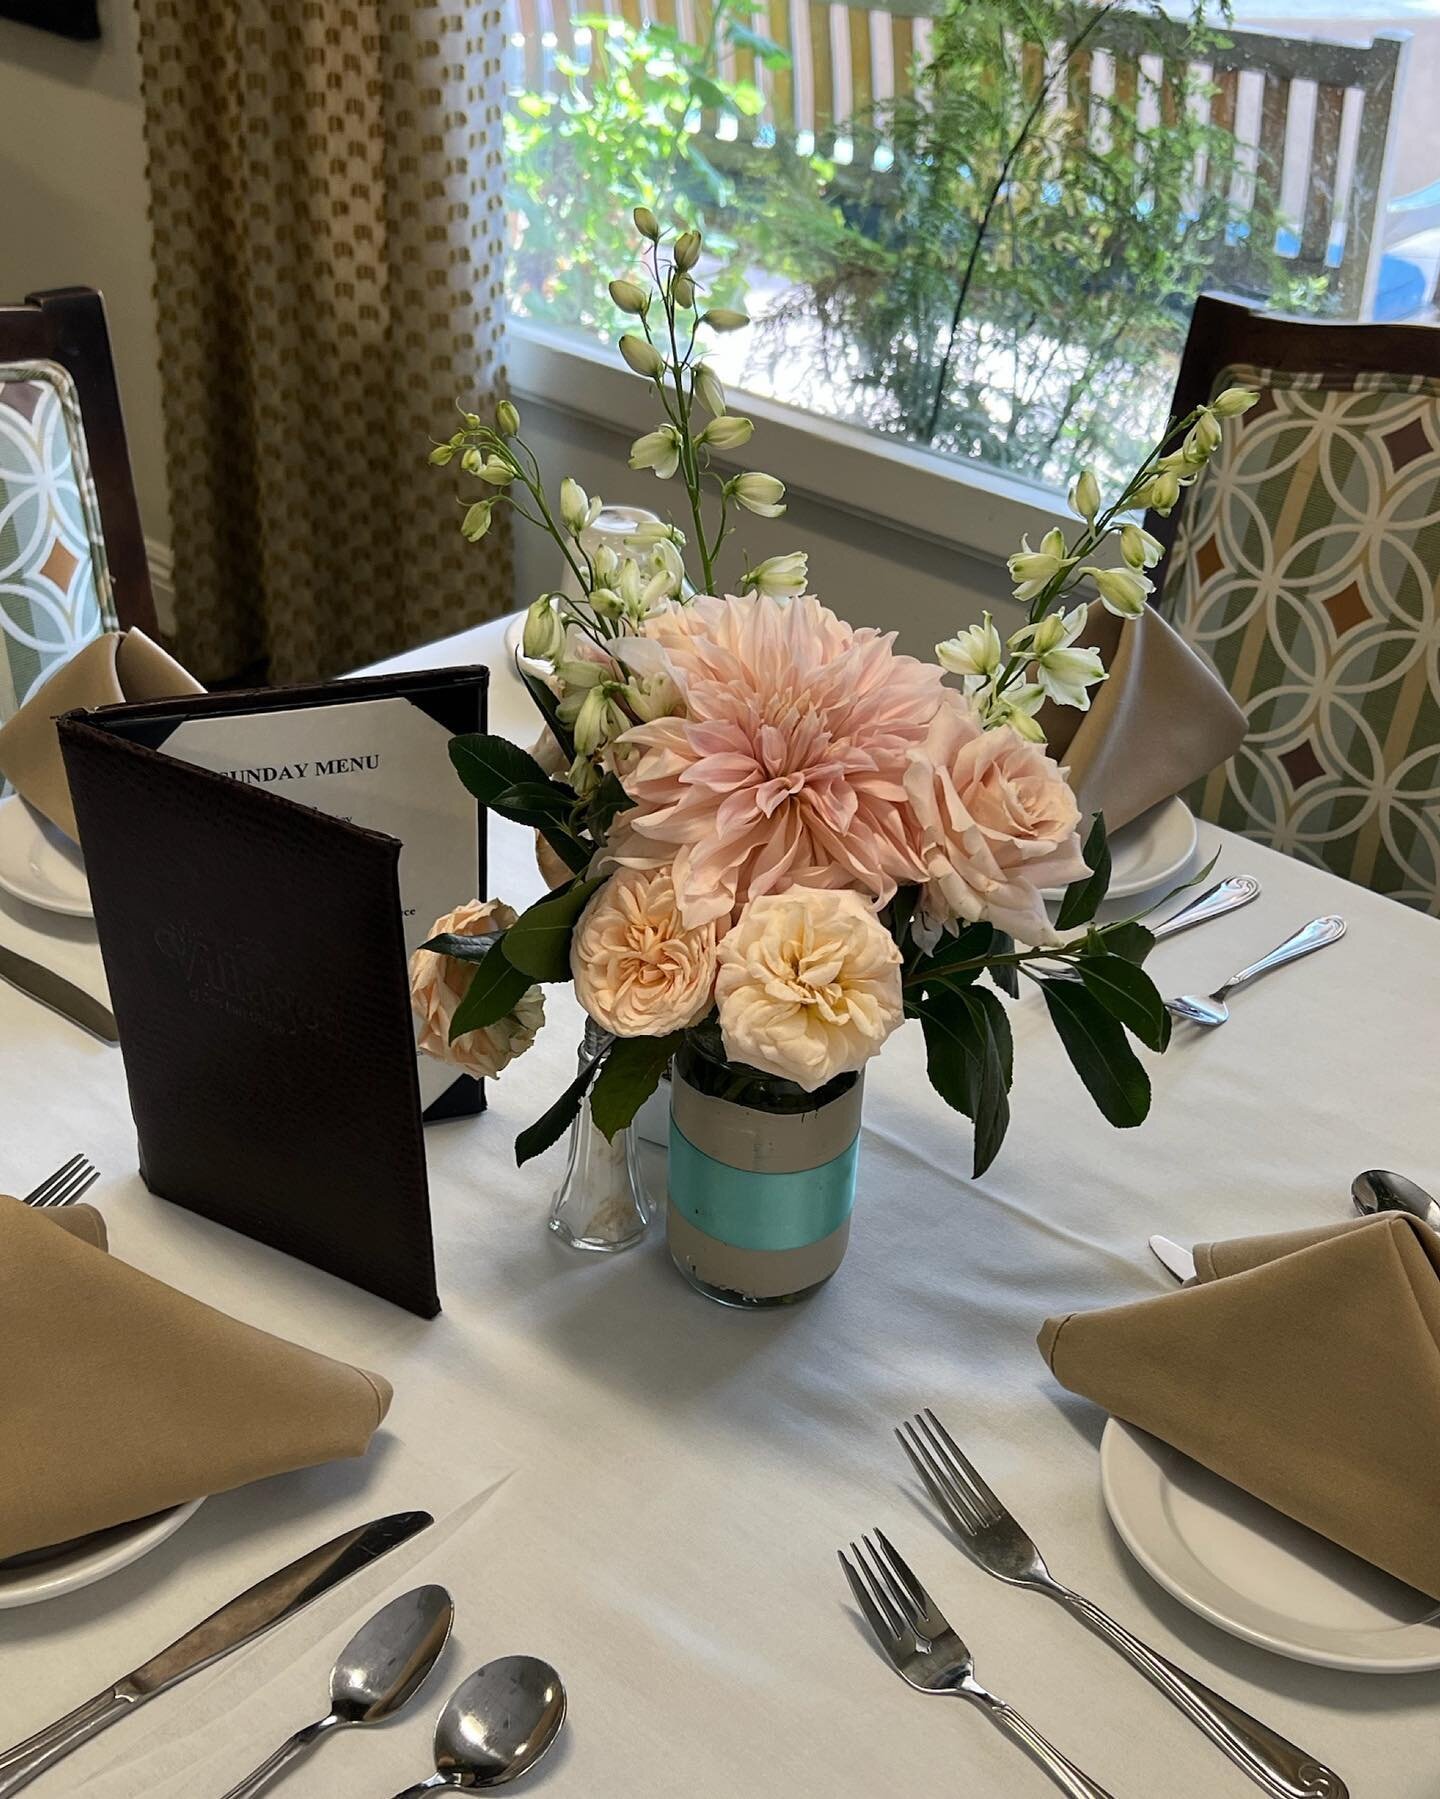 Floral centerpieces should beautify more than just one meal, don&rsquo;t you agree?🌸

We were so touched when we got a message from a bride asking if we could repurpose her wedding flowers to the retirement community where her grandmother resides. W